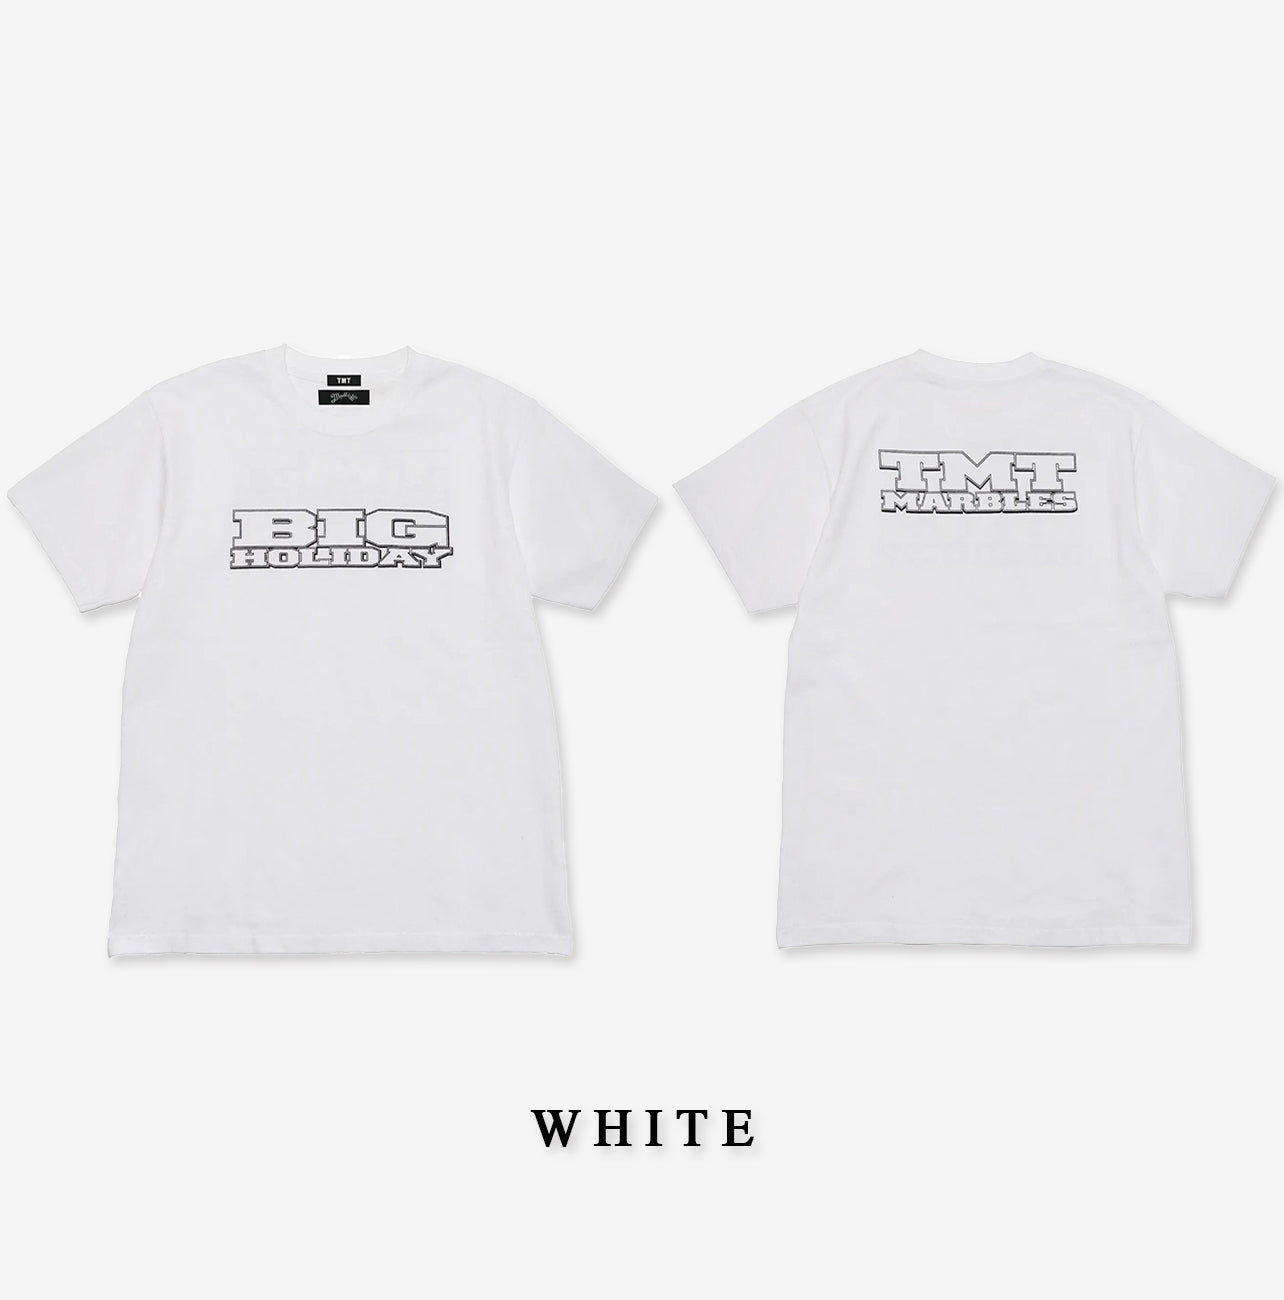 TMT×Marbles S/S T-SHIRTS (BIG HOLIDAY)